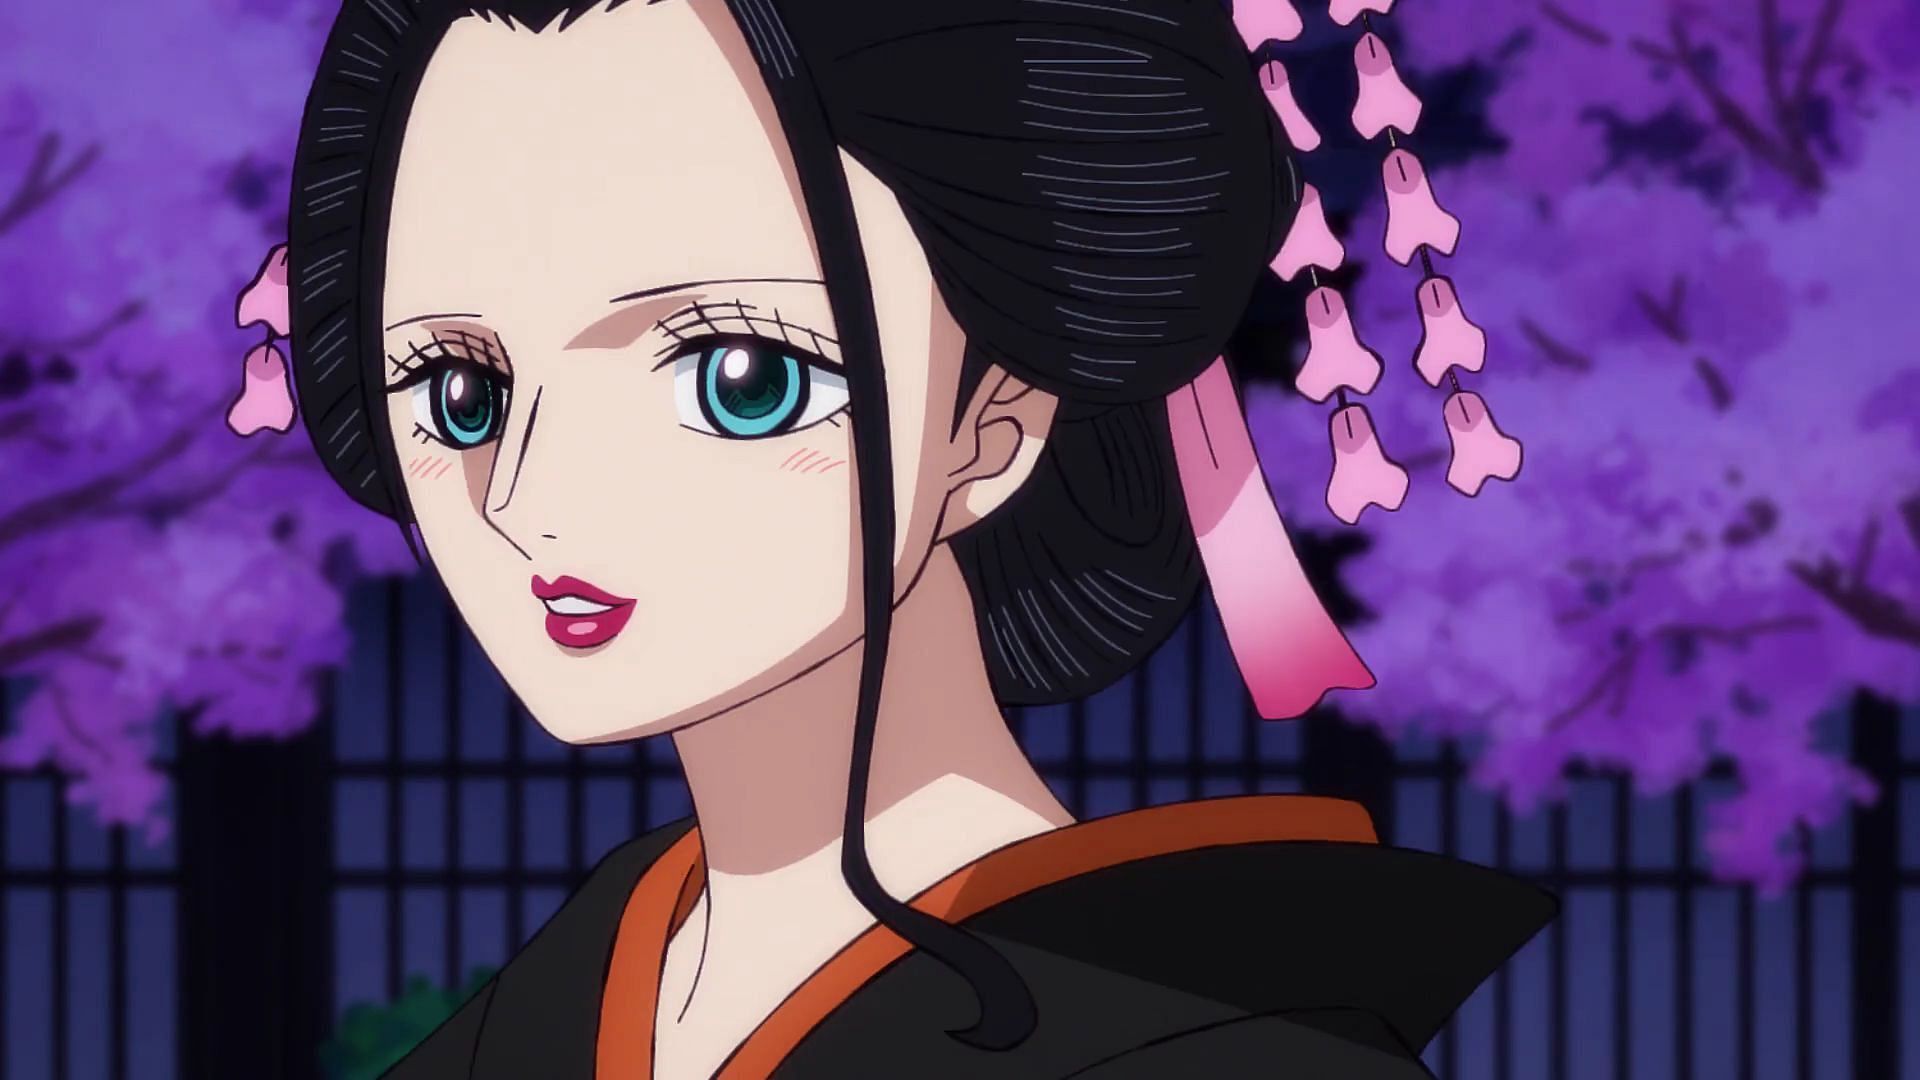 Robin as seen in One Piece (Image via Toei Animation)